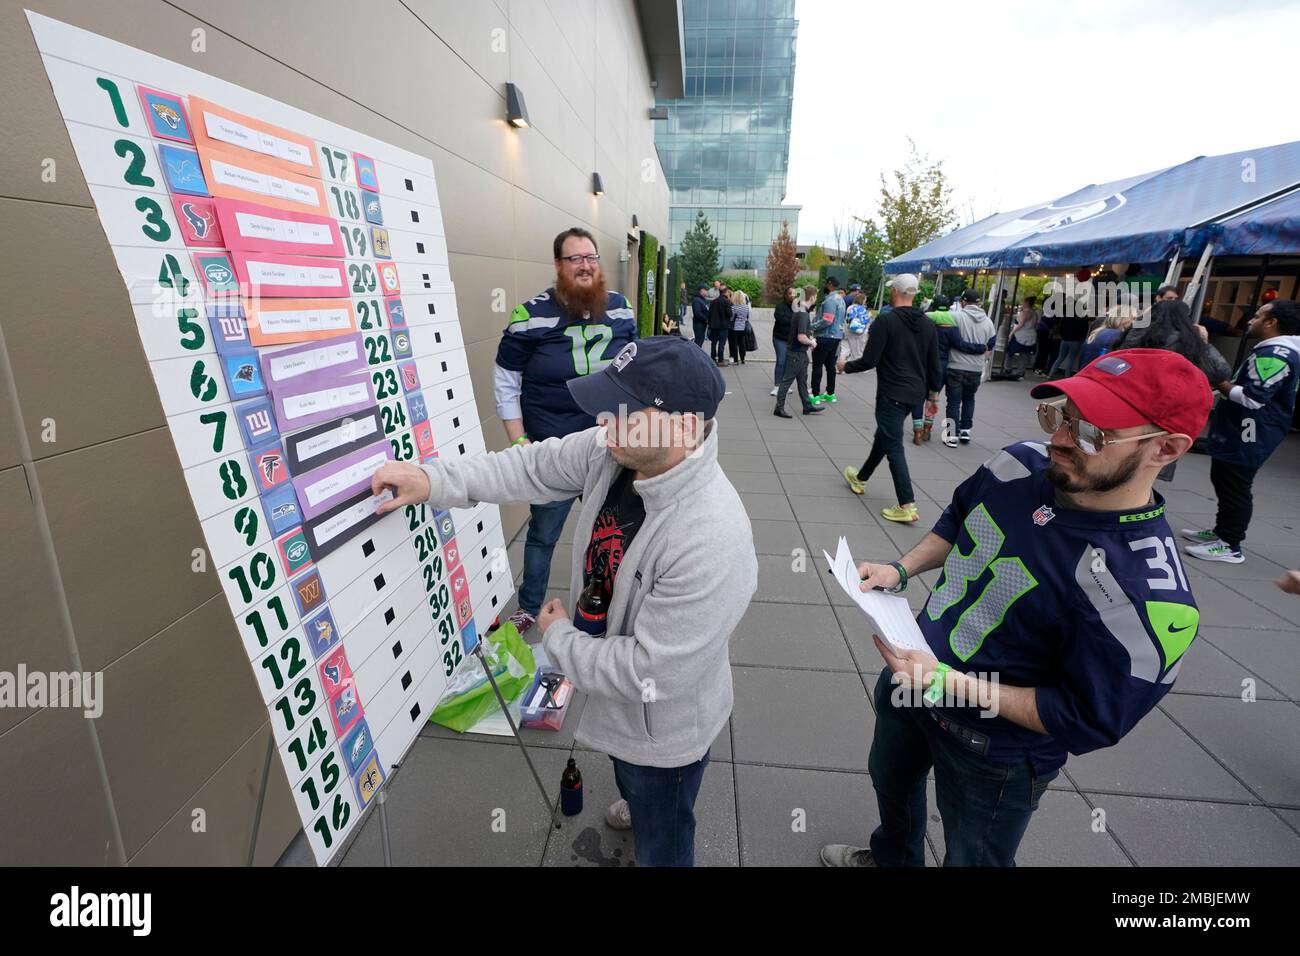 Ryan Tinnea, right, looks on as his brother, Brian Tinnea, center, updates their home-made NFL football draft board during an NFL football draft day party, Thursday, April 28, 2022, in Renton, Wash., near Seattle. (AP Photo/Ted S. Warren) Stock Photo